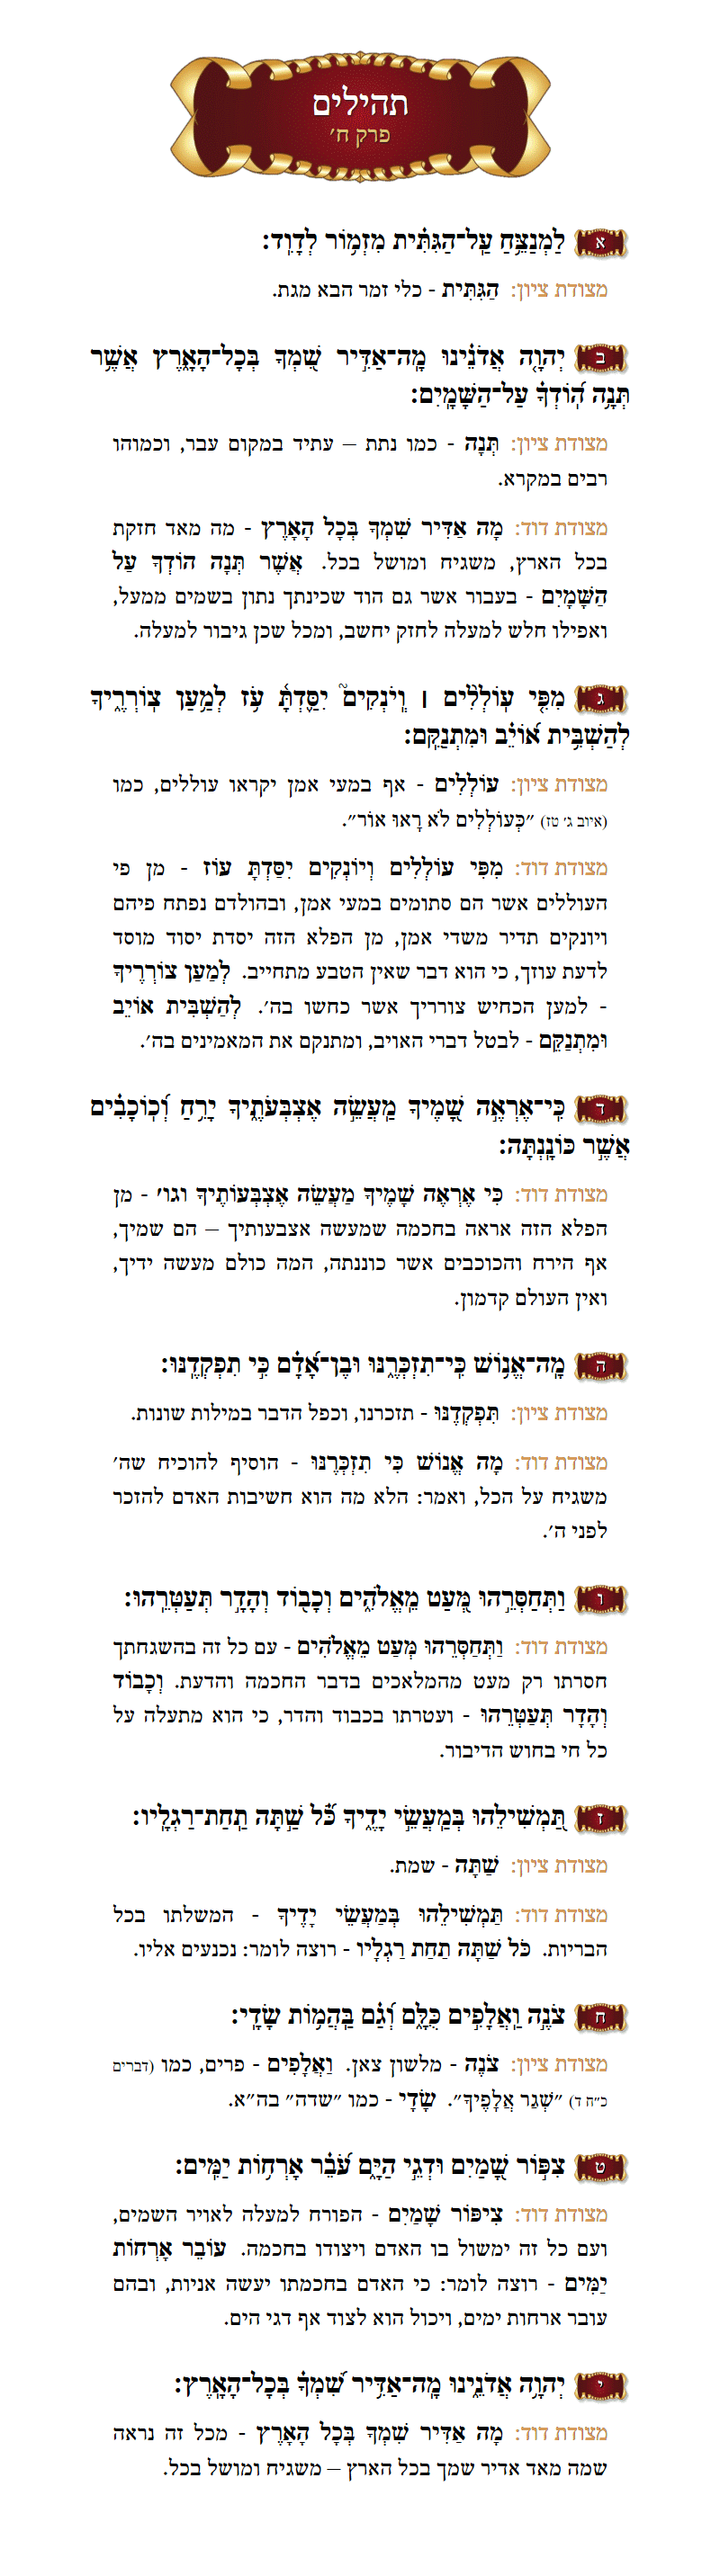 Sefer Tehillim Chapter 8 with commentary